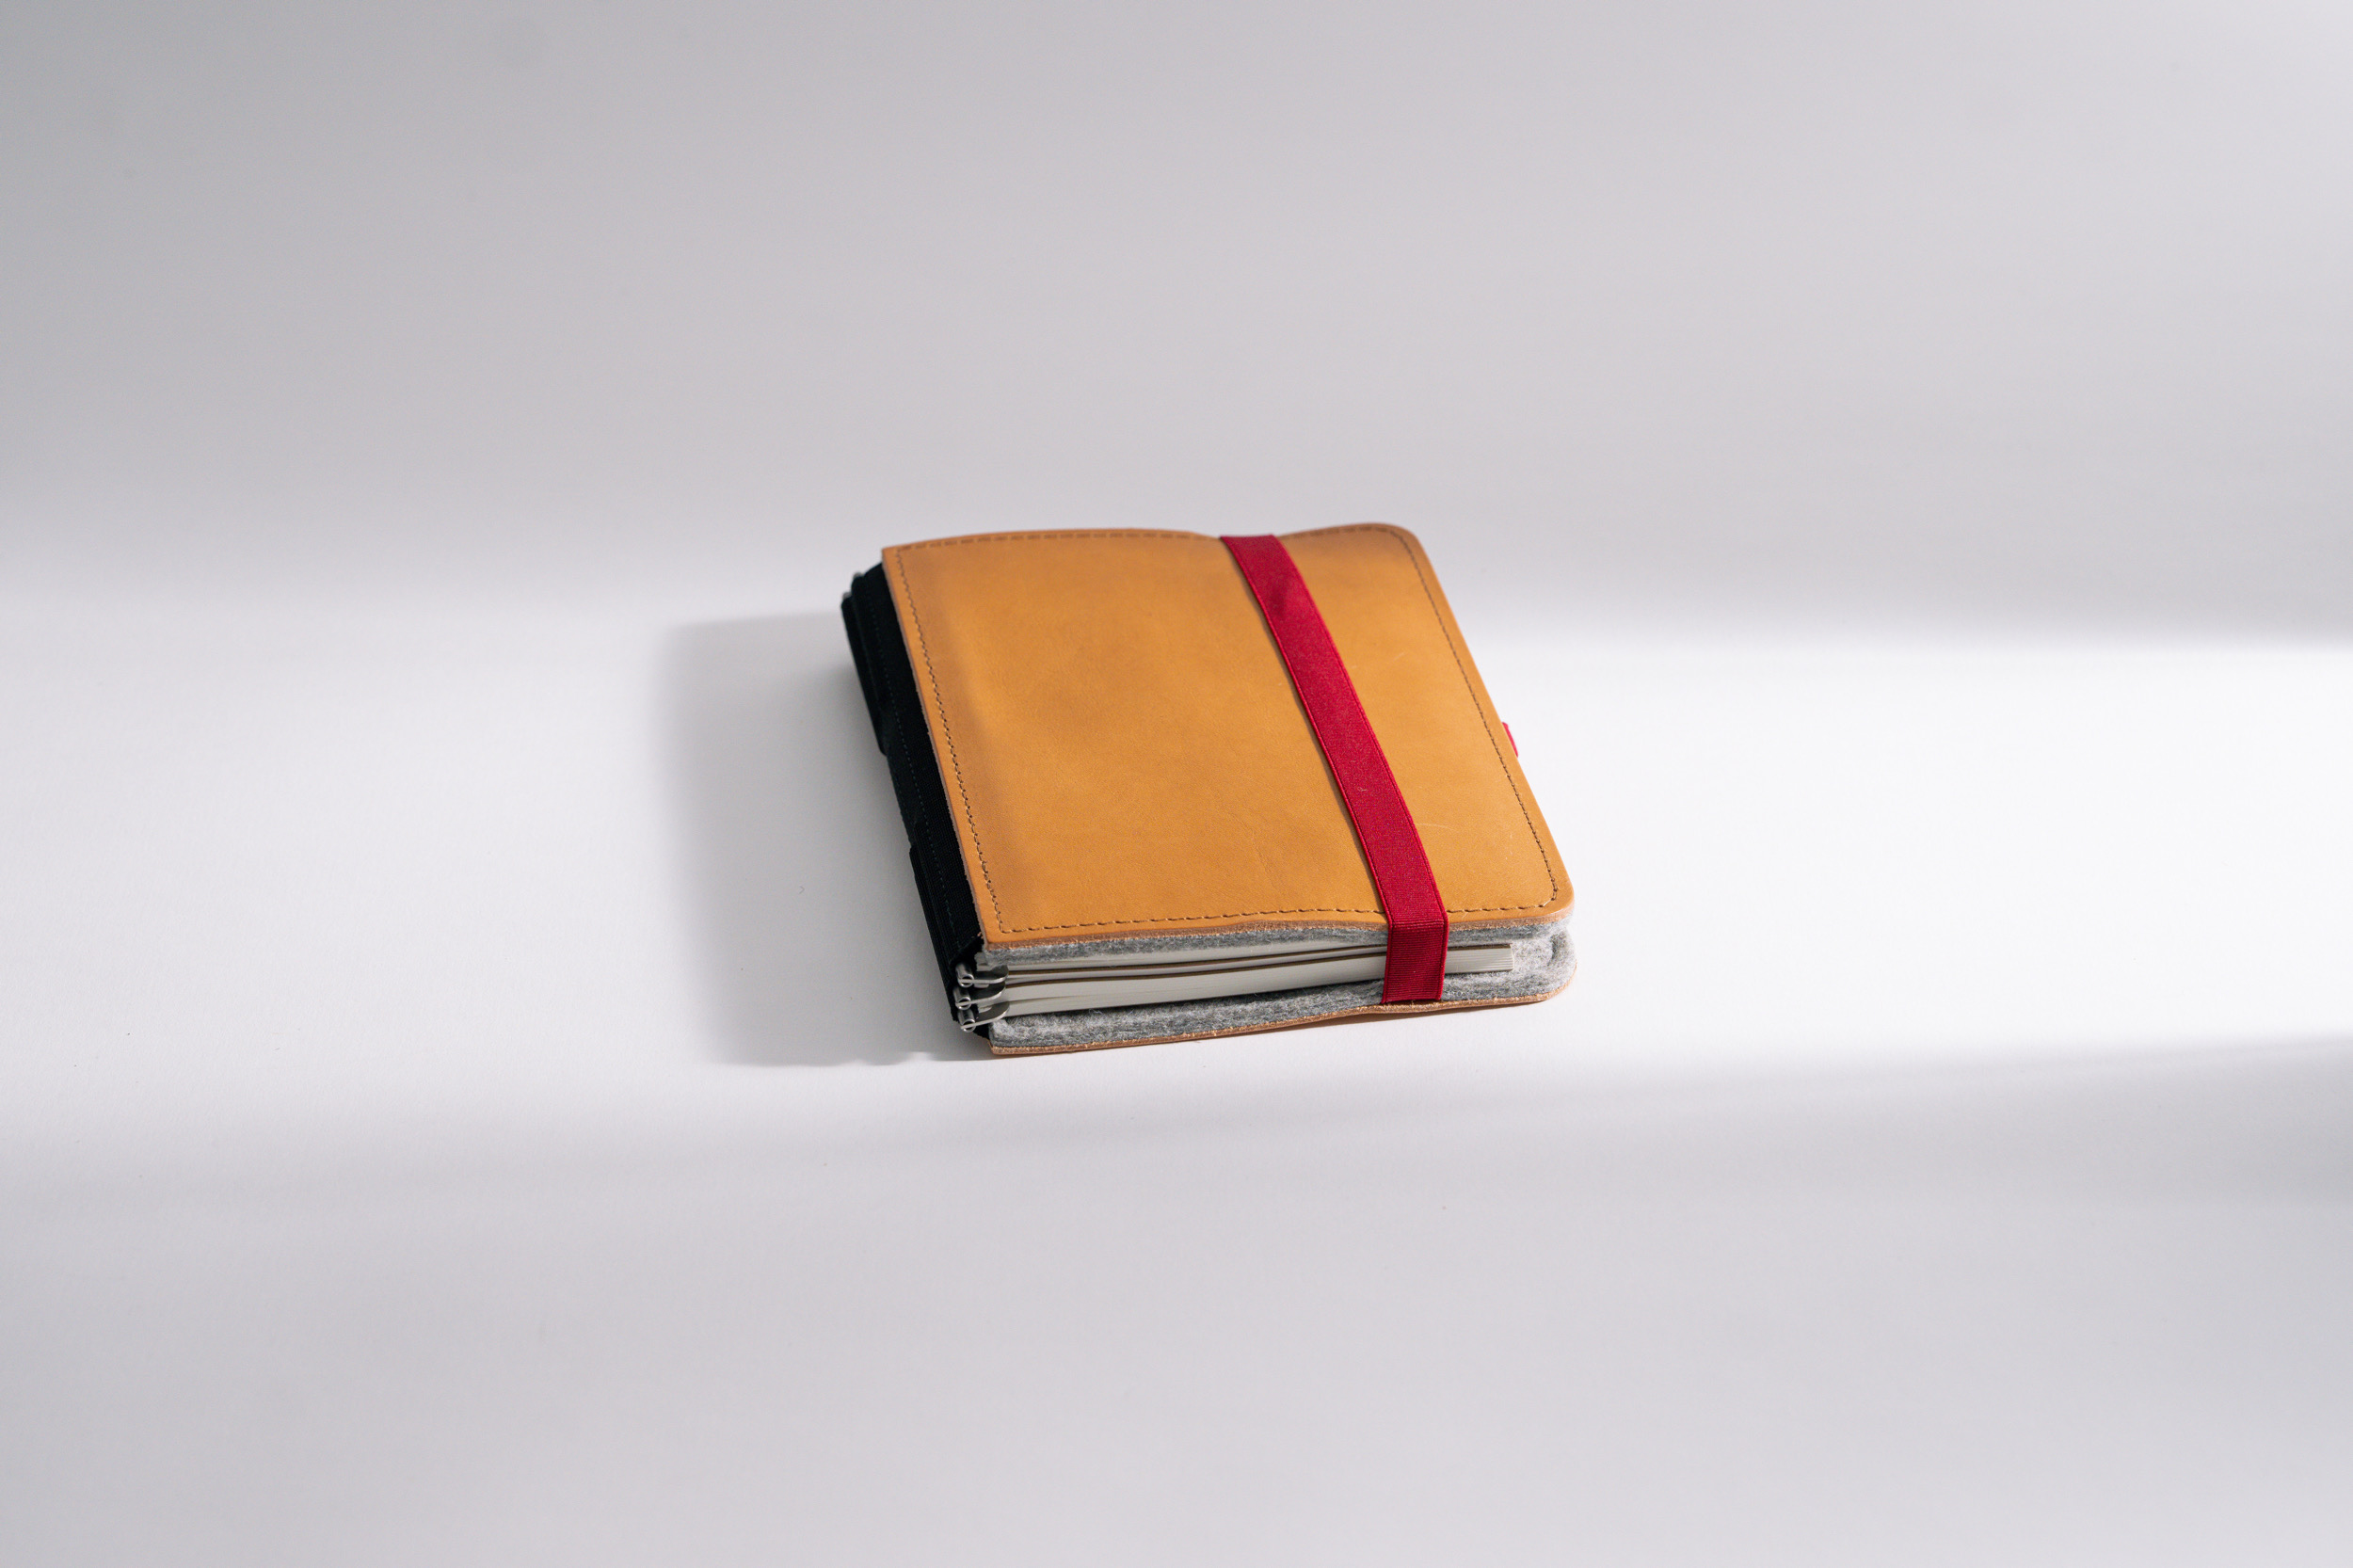 Roterfaden LTD_027 – Classic pocket companion in chrome-free smooth leather and wool felt.